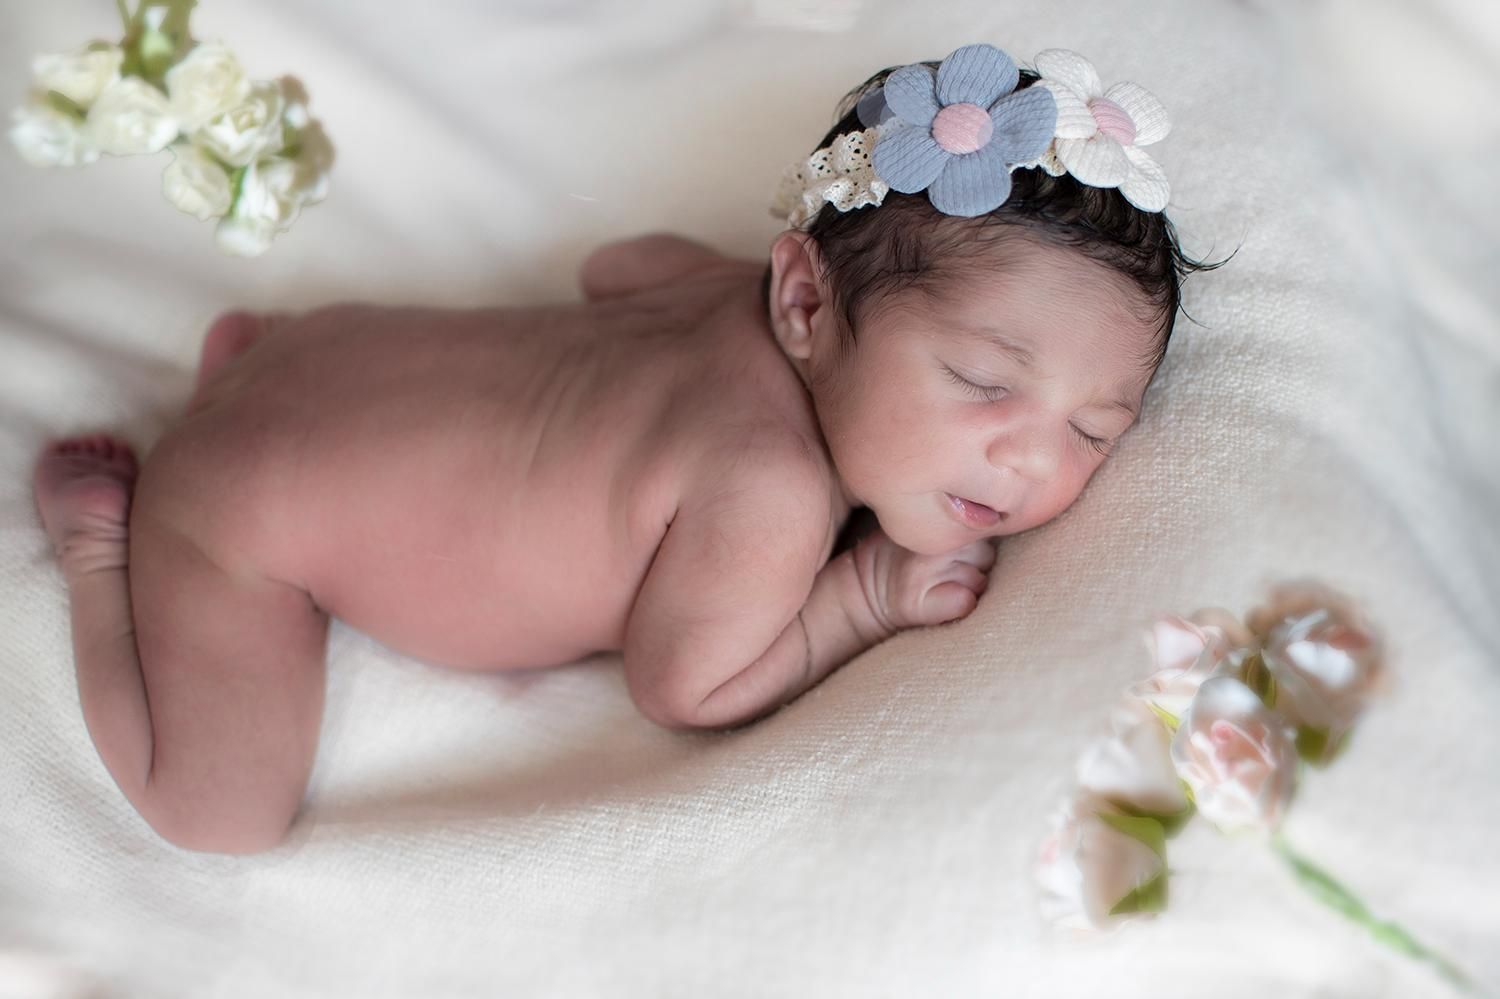 A Newborn Baby Wearing a Headband with Flowers on it — Photography in Darwin, NT